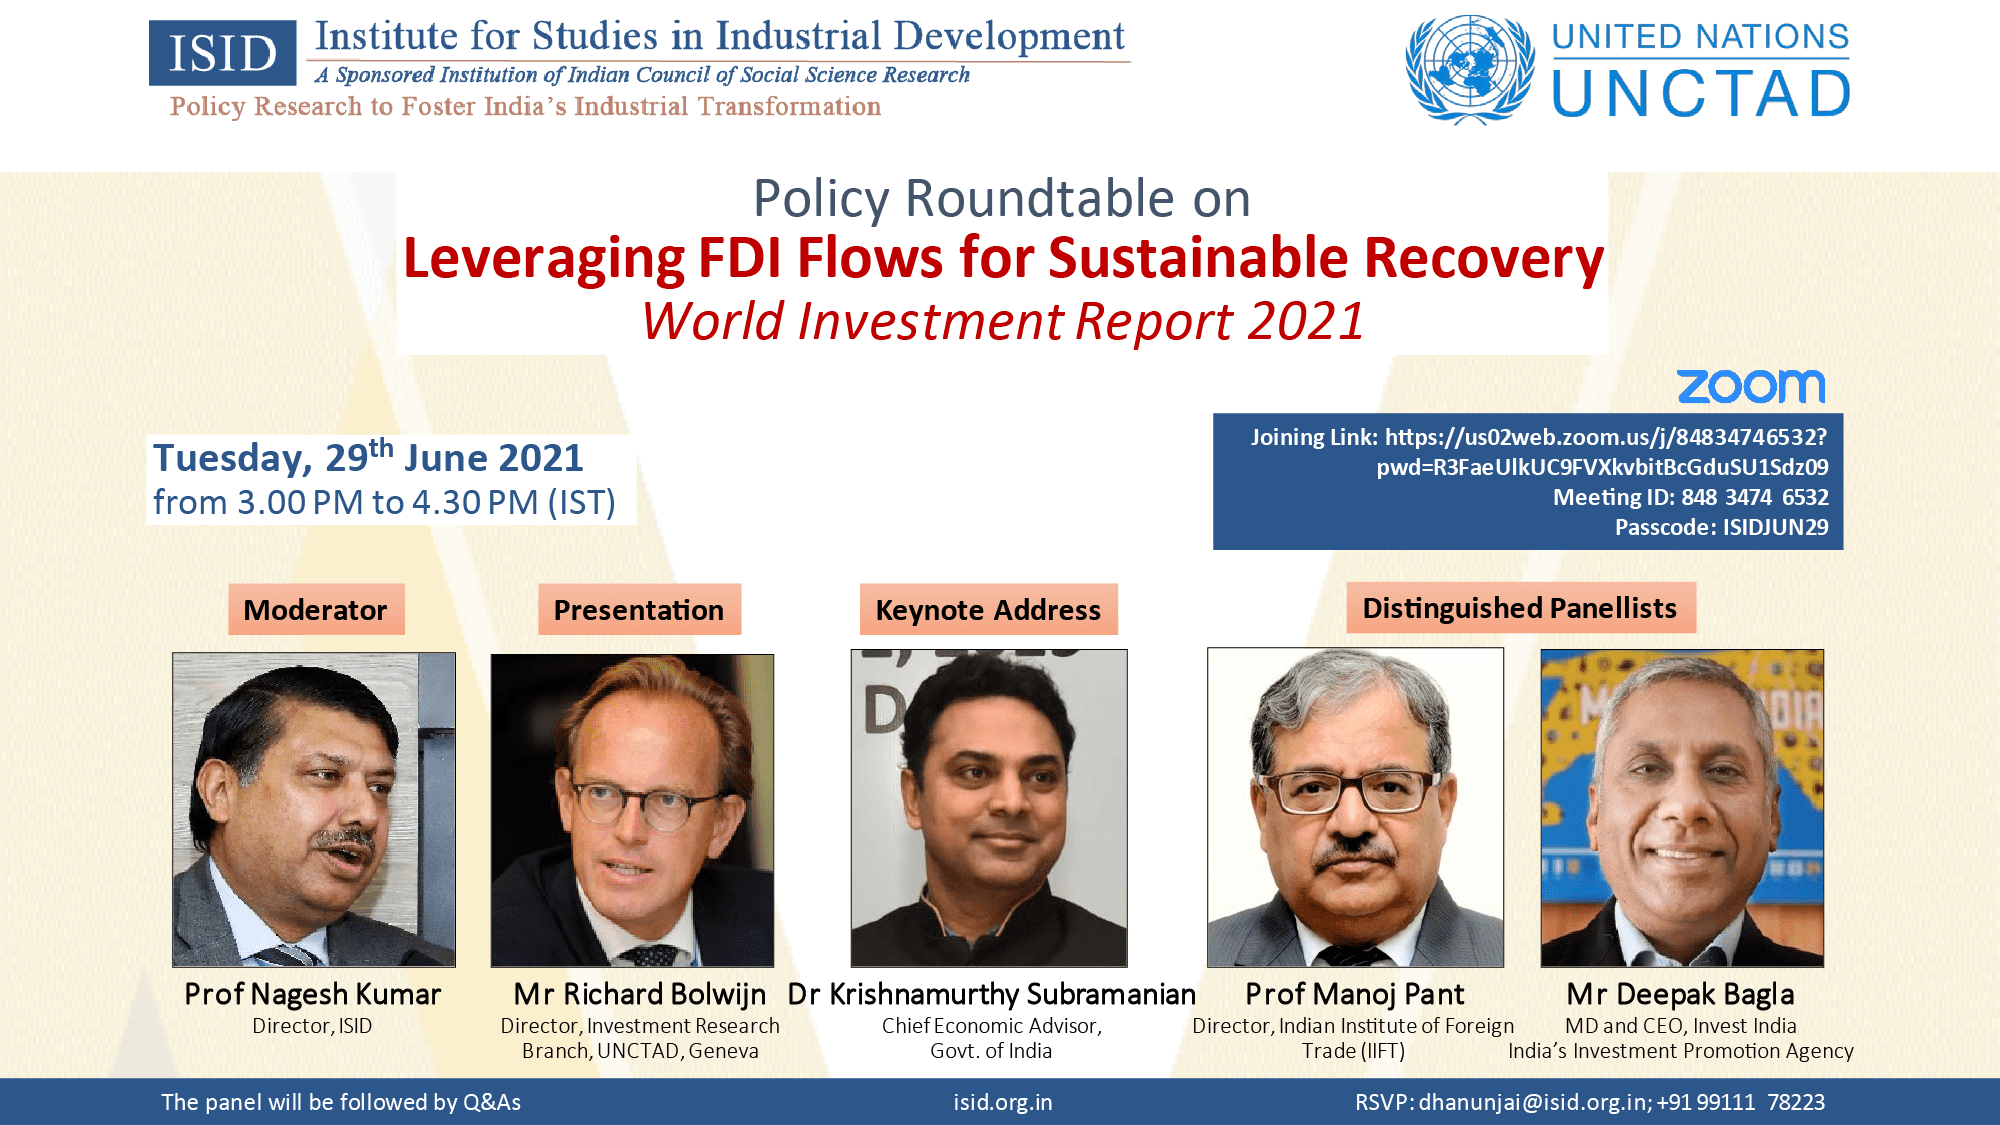 ISID-UNCTAD Policy Roundtable on Leveraging FDI Flows for Sustainable Recovery